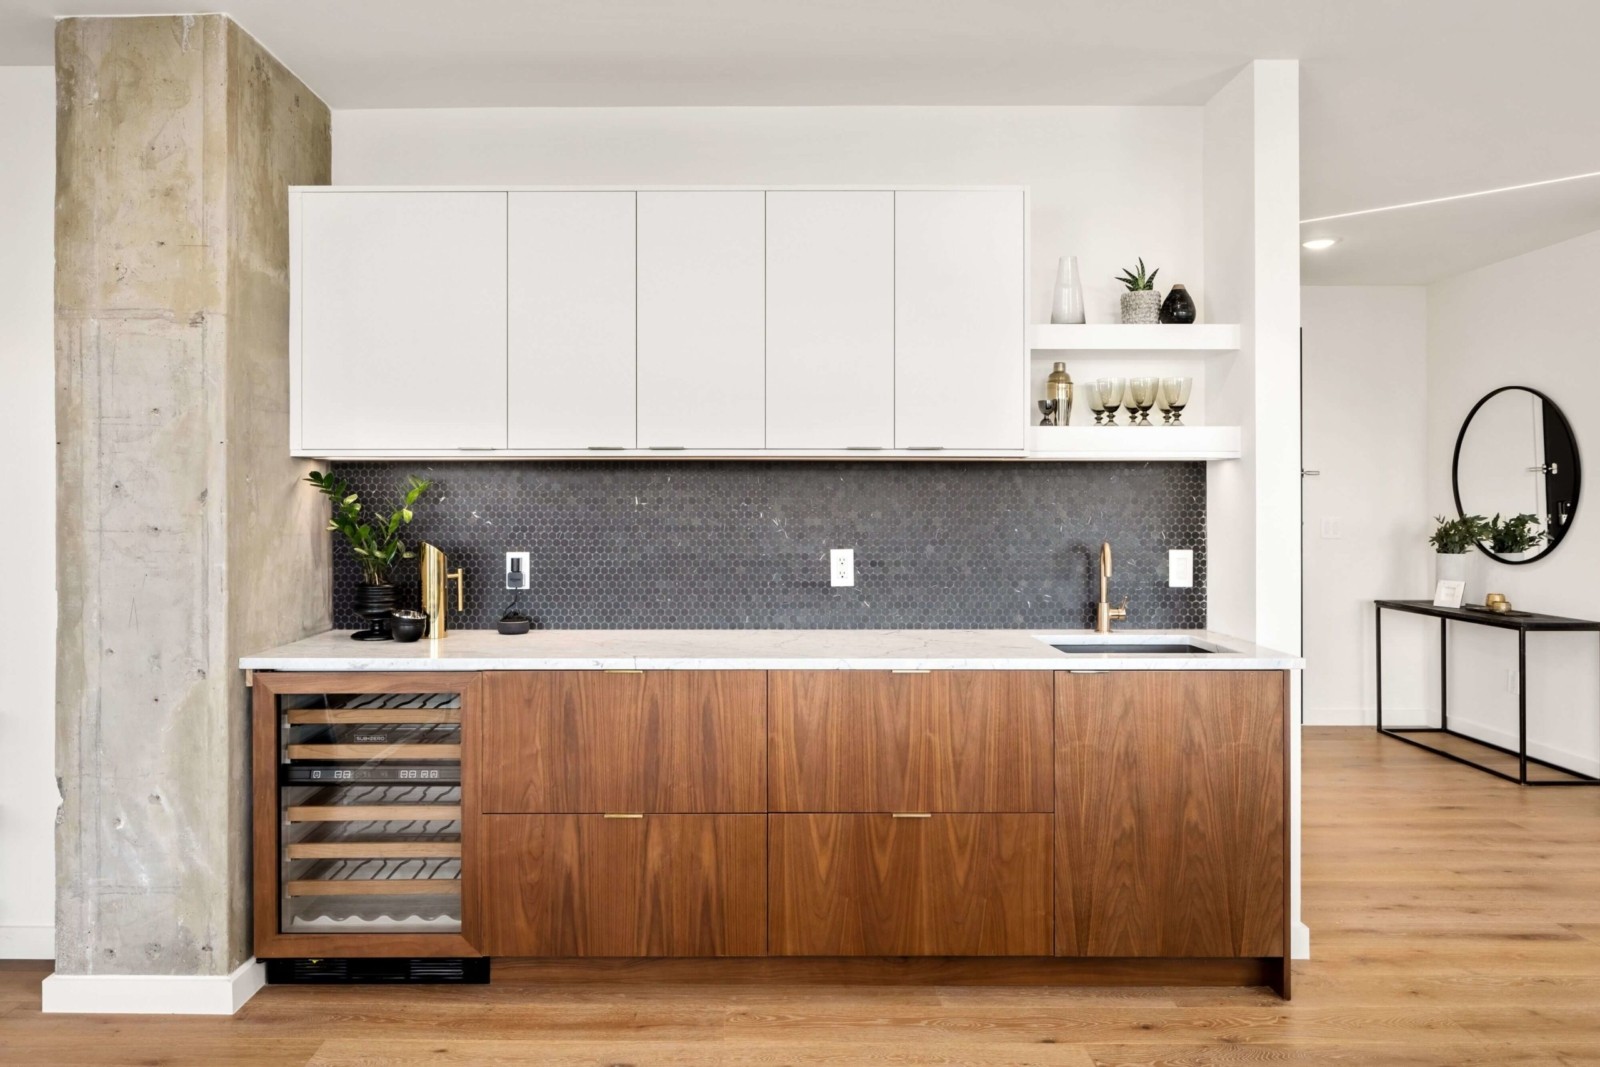 Mod Cabinetry for Walnut Kitchen Cabinets, walnut kitchen cabinets, modern walnut kitchen cabinets, dark walnut kitchen cabinets, light walnut kitchen cabinets